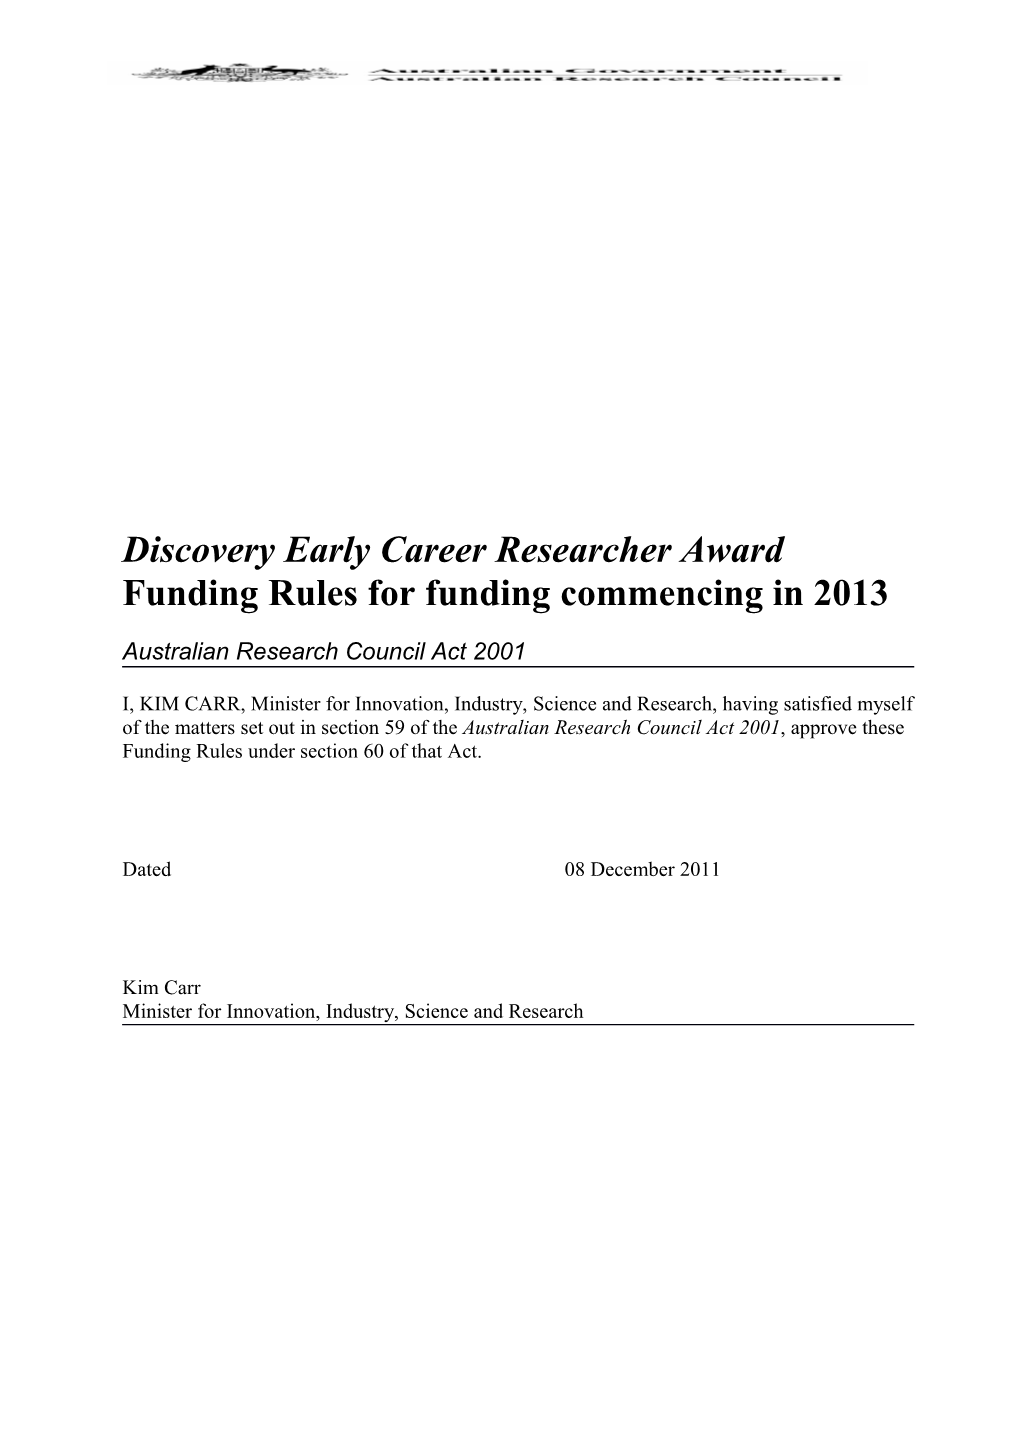 Discovery Early Career Researcher Awardfunding Rules for Funding Commencing in 2013